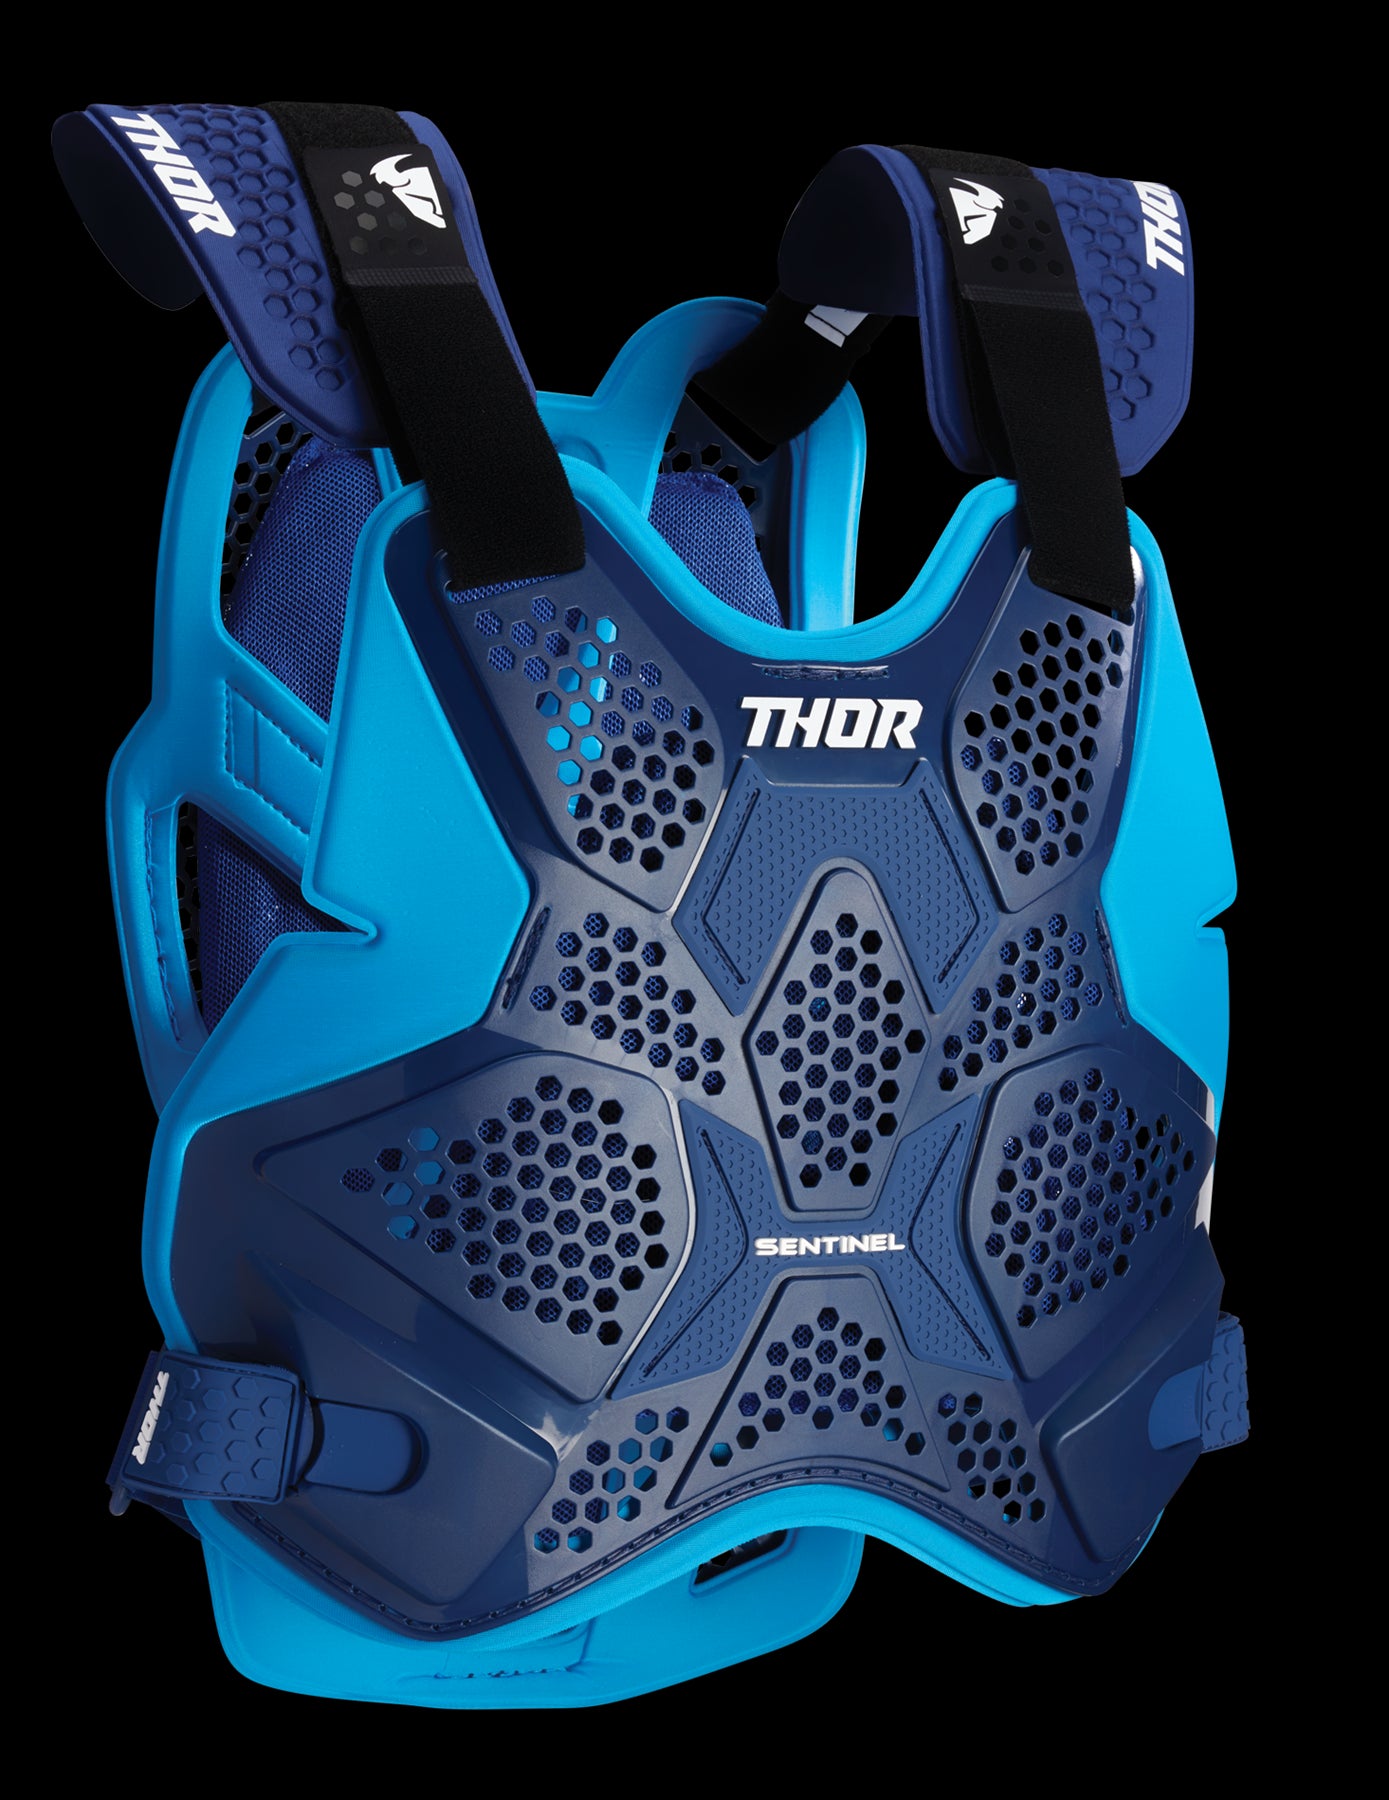 Thor Spring 2024 Motocross Chest Protector Guard Sentil Pro Blue